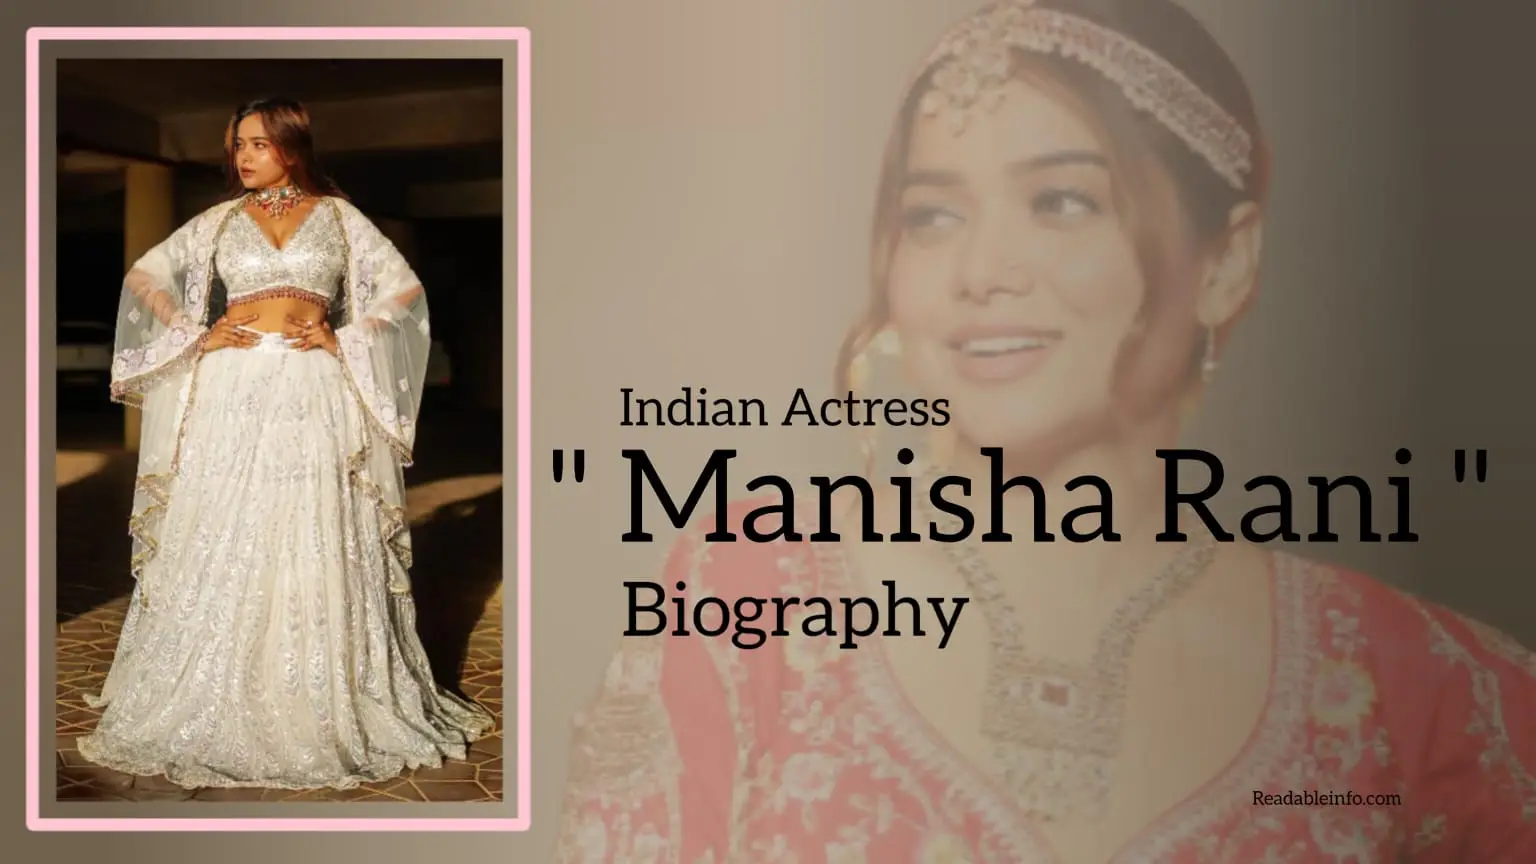 You are currently viewing Manisha Rani Biography (Indian Actress)